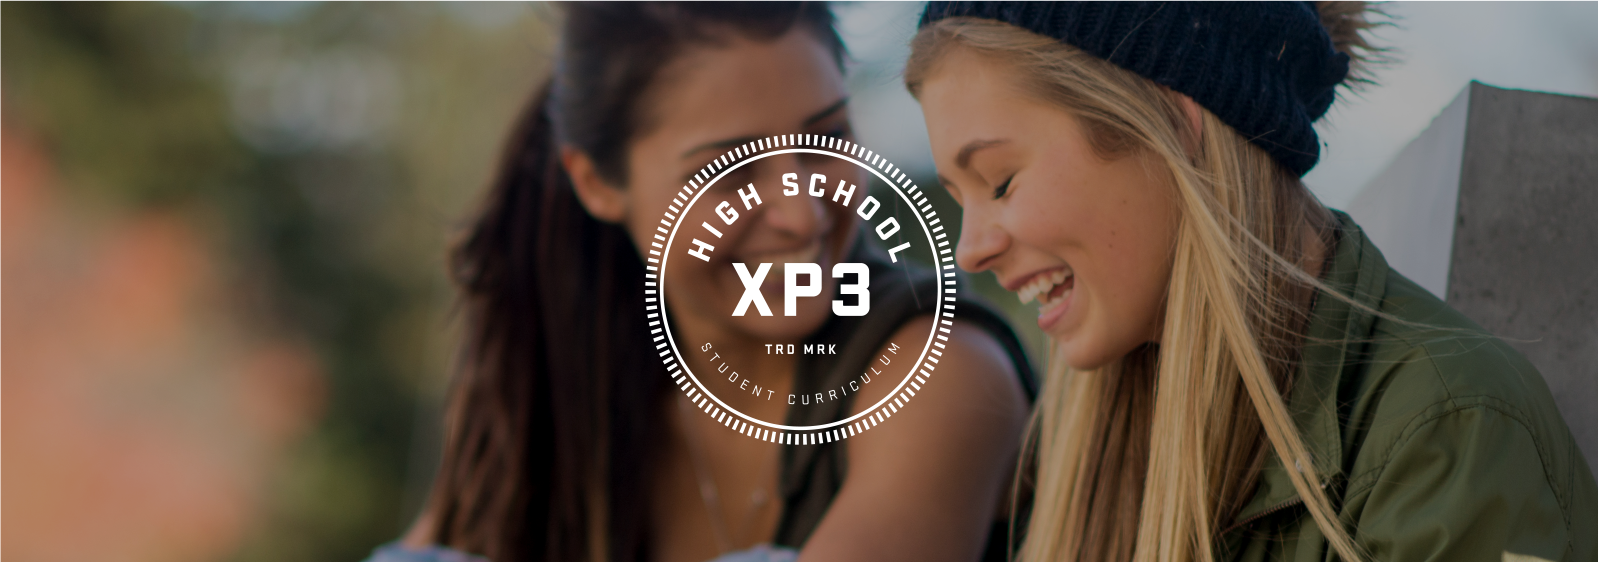 XP3 High School Curriculum logo, with two girls laughing in the background